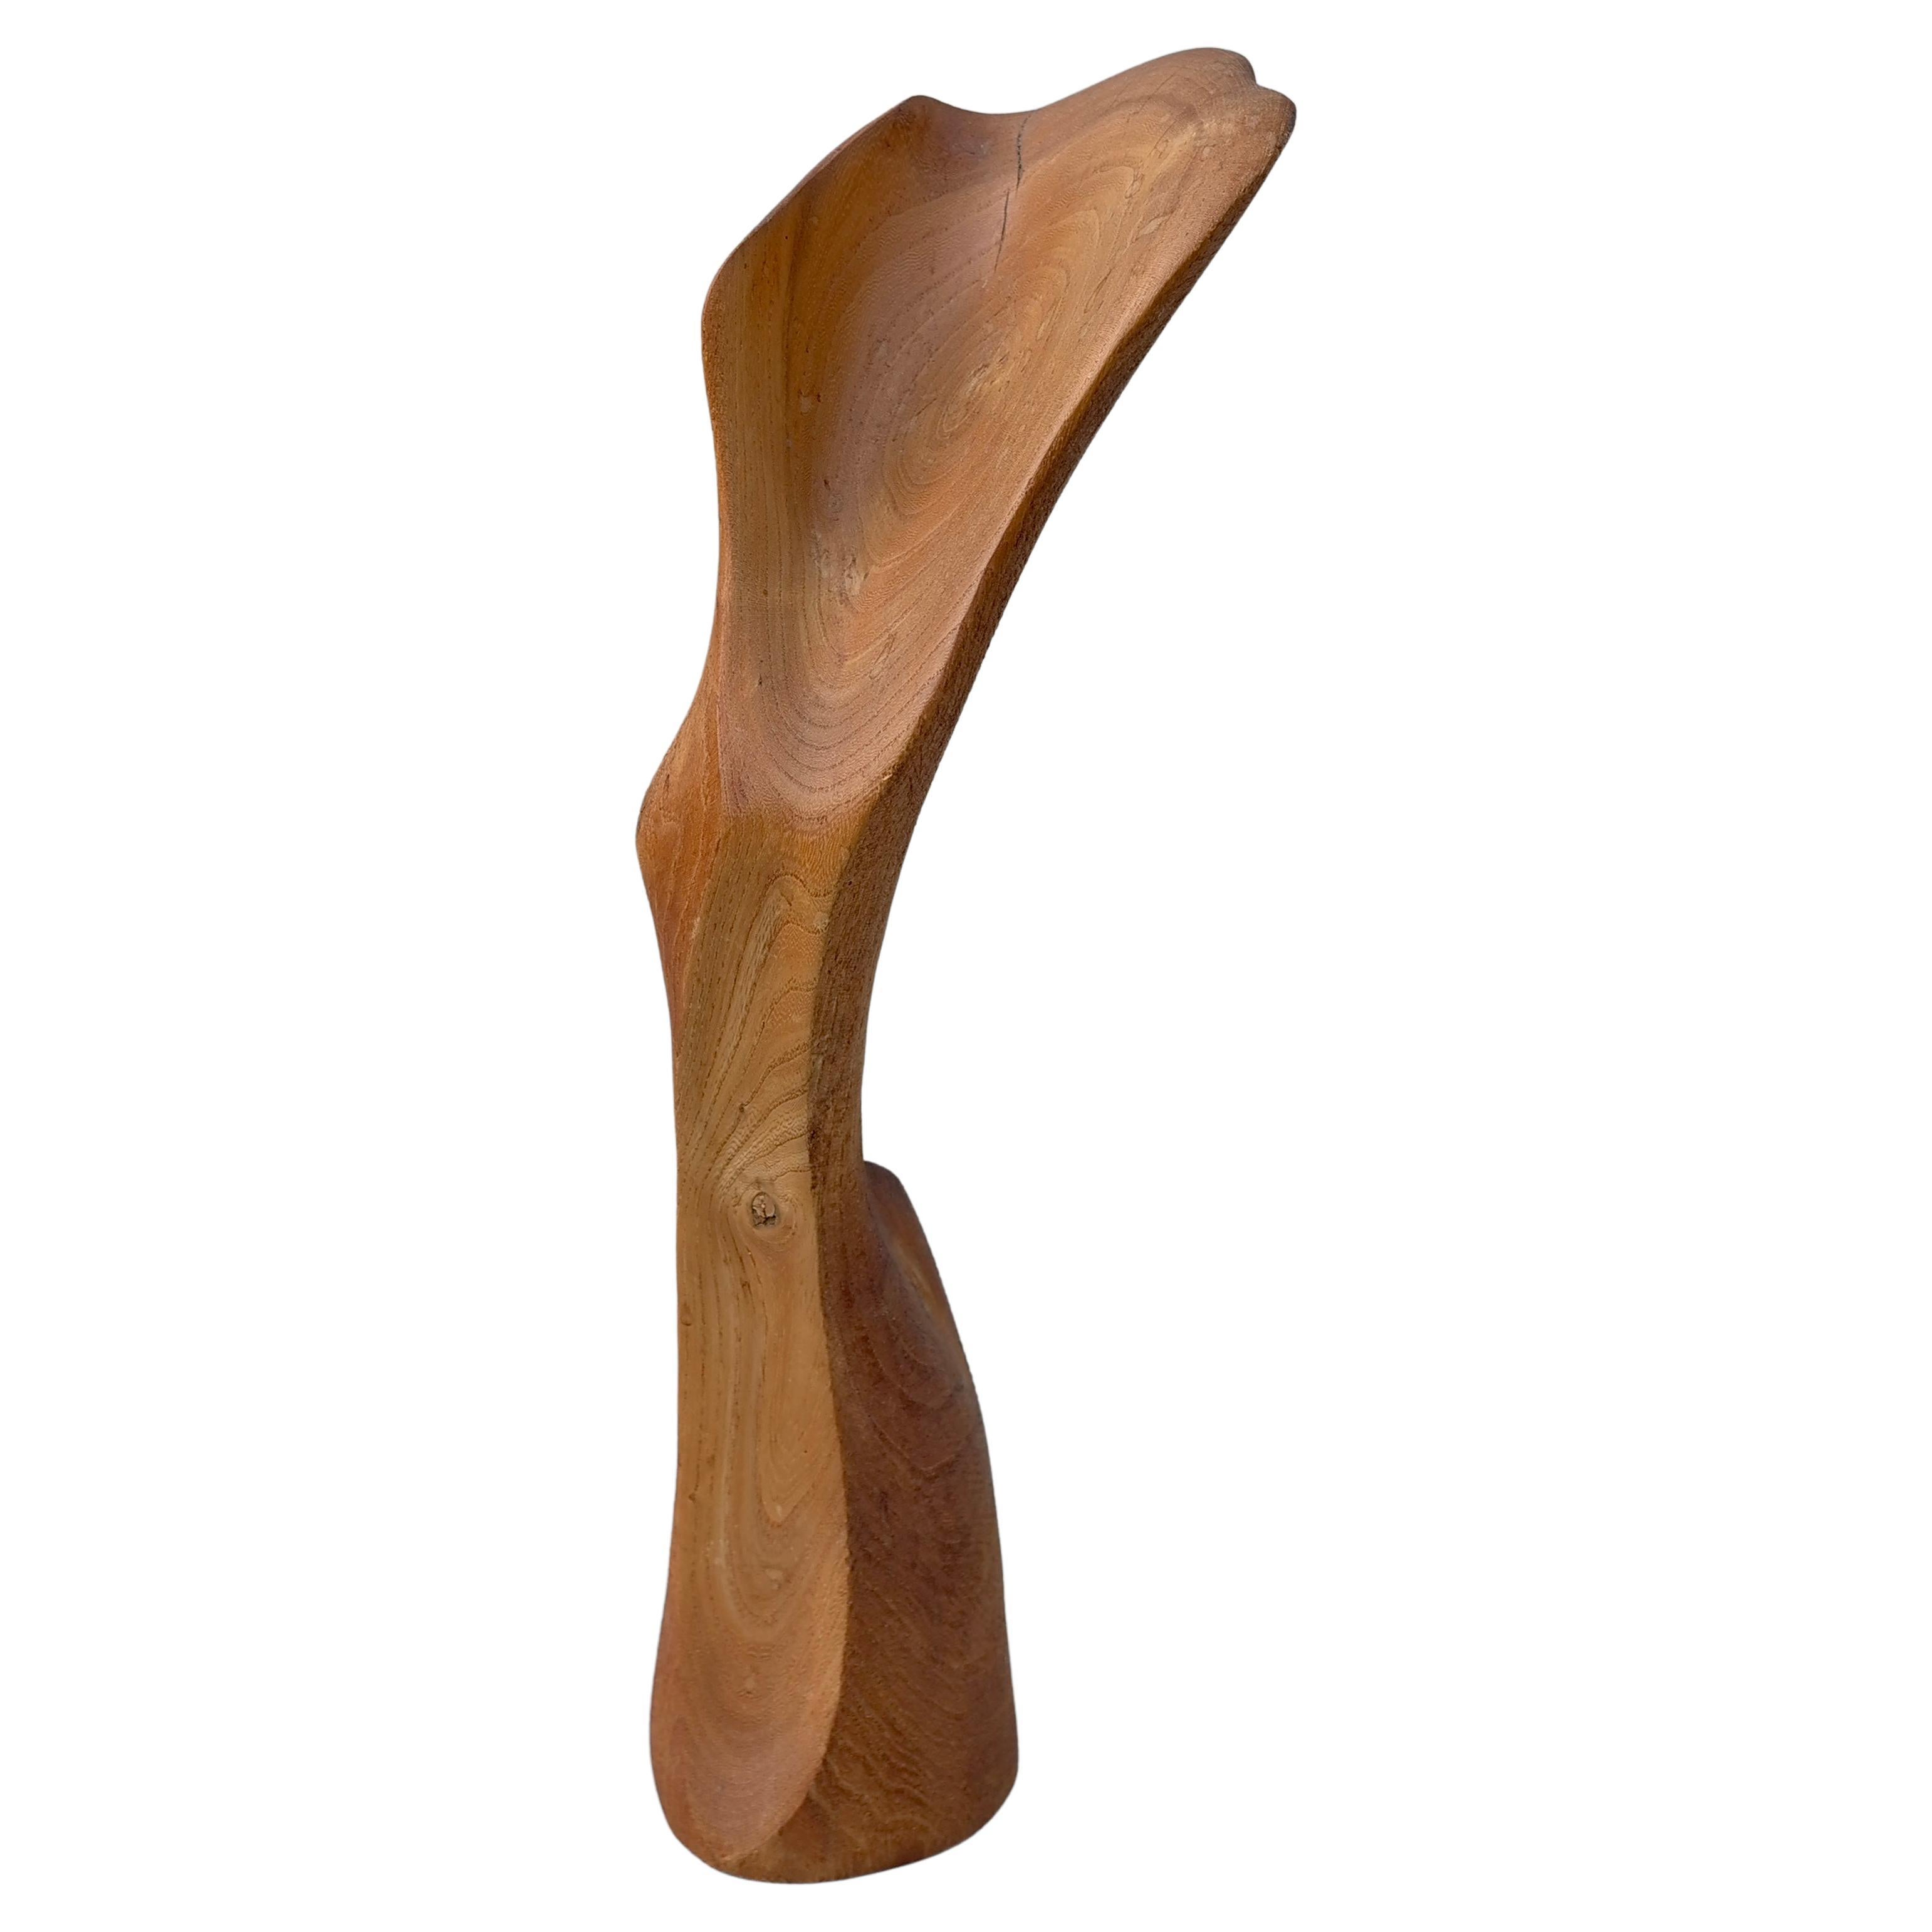  Abstract Mid-Century Modern Organic Wooden Sculpture, 1960's For Sale